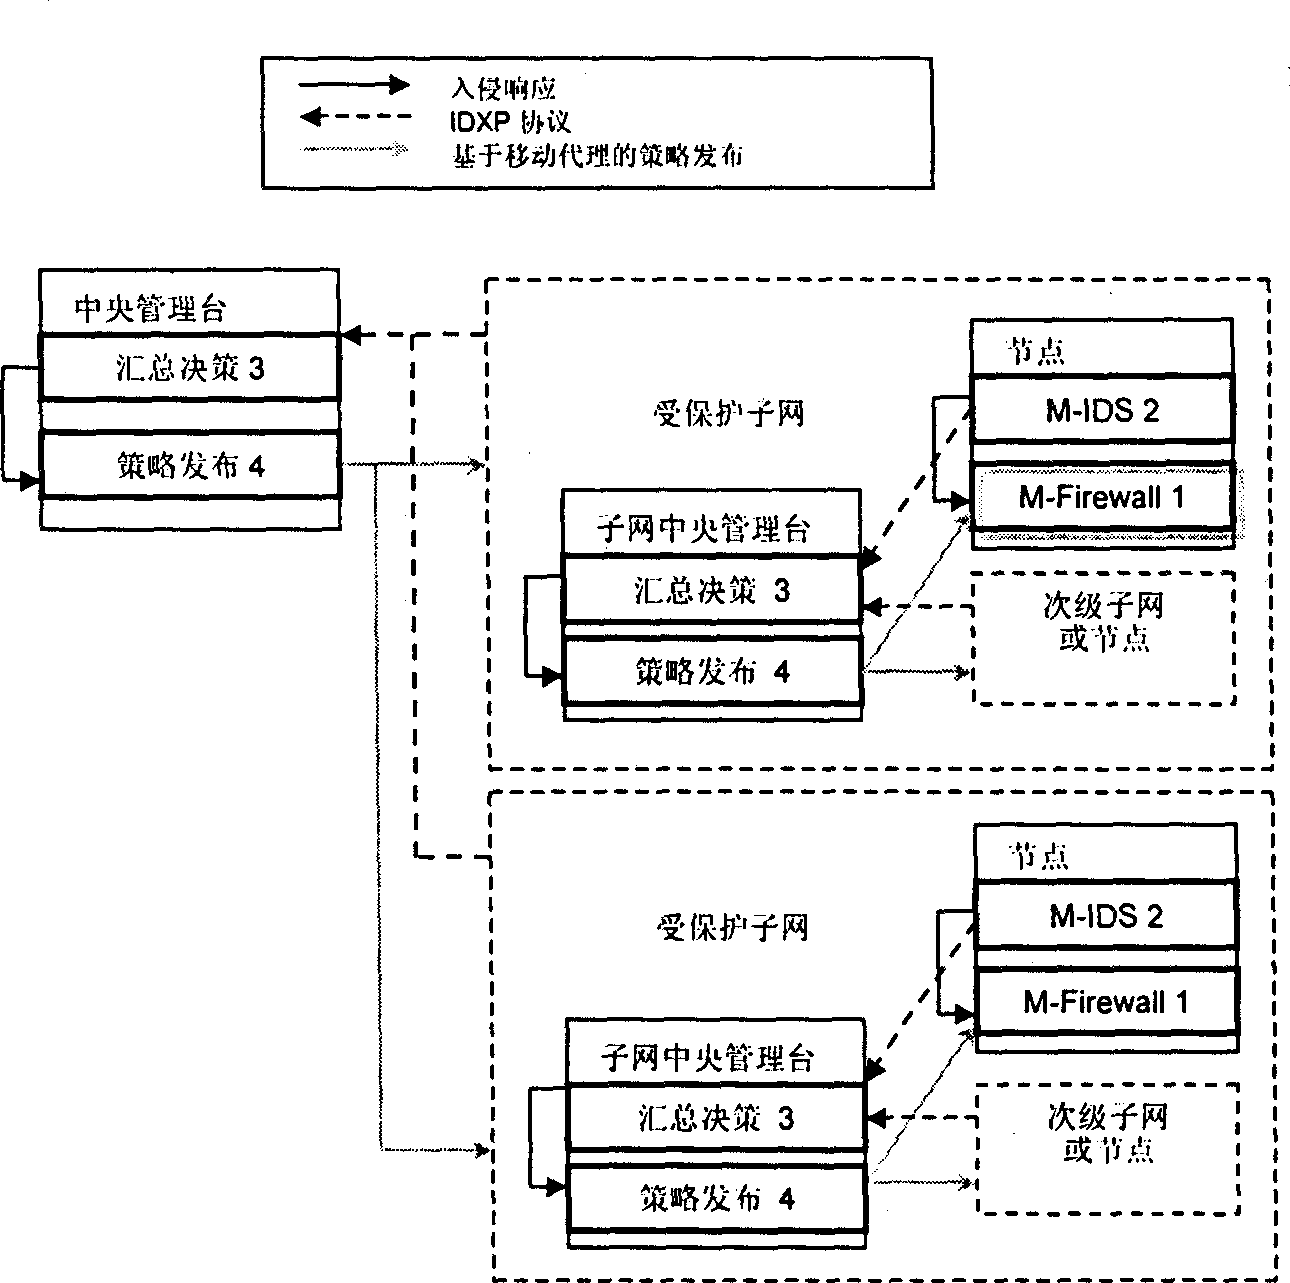 Distributed dynamic network security protecting system